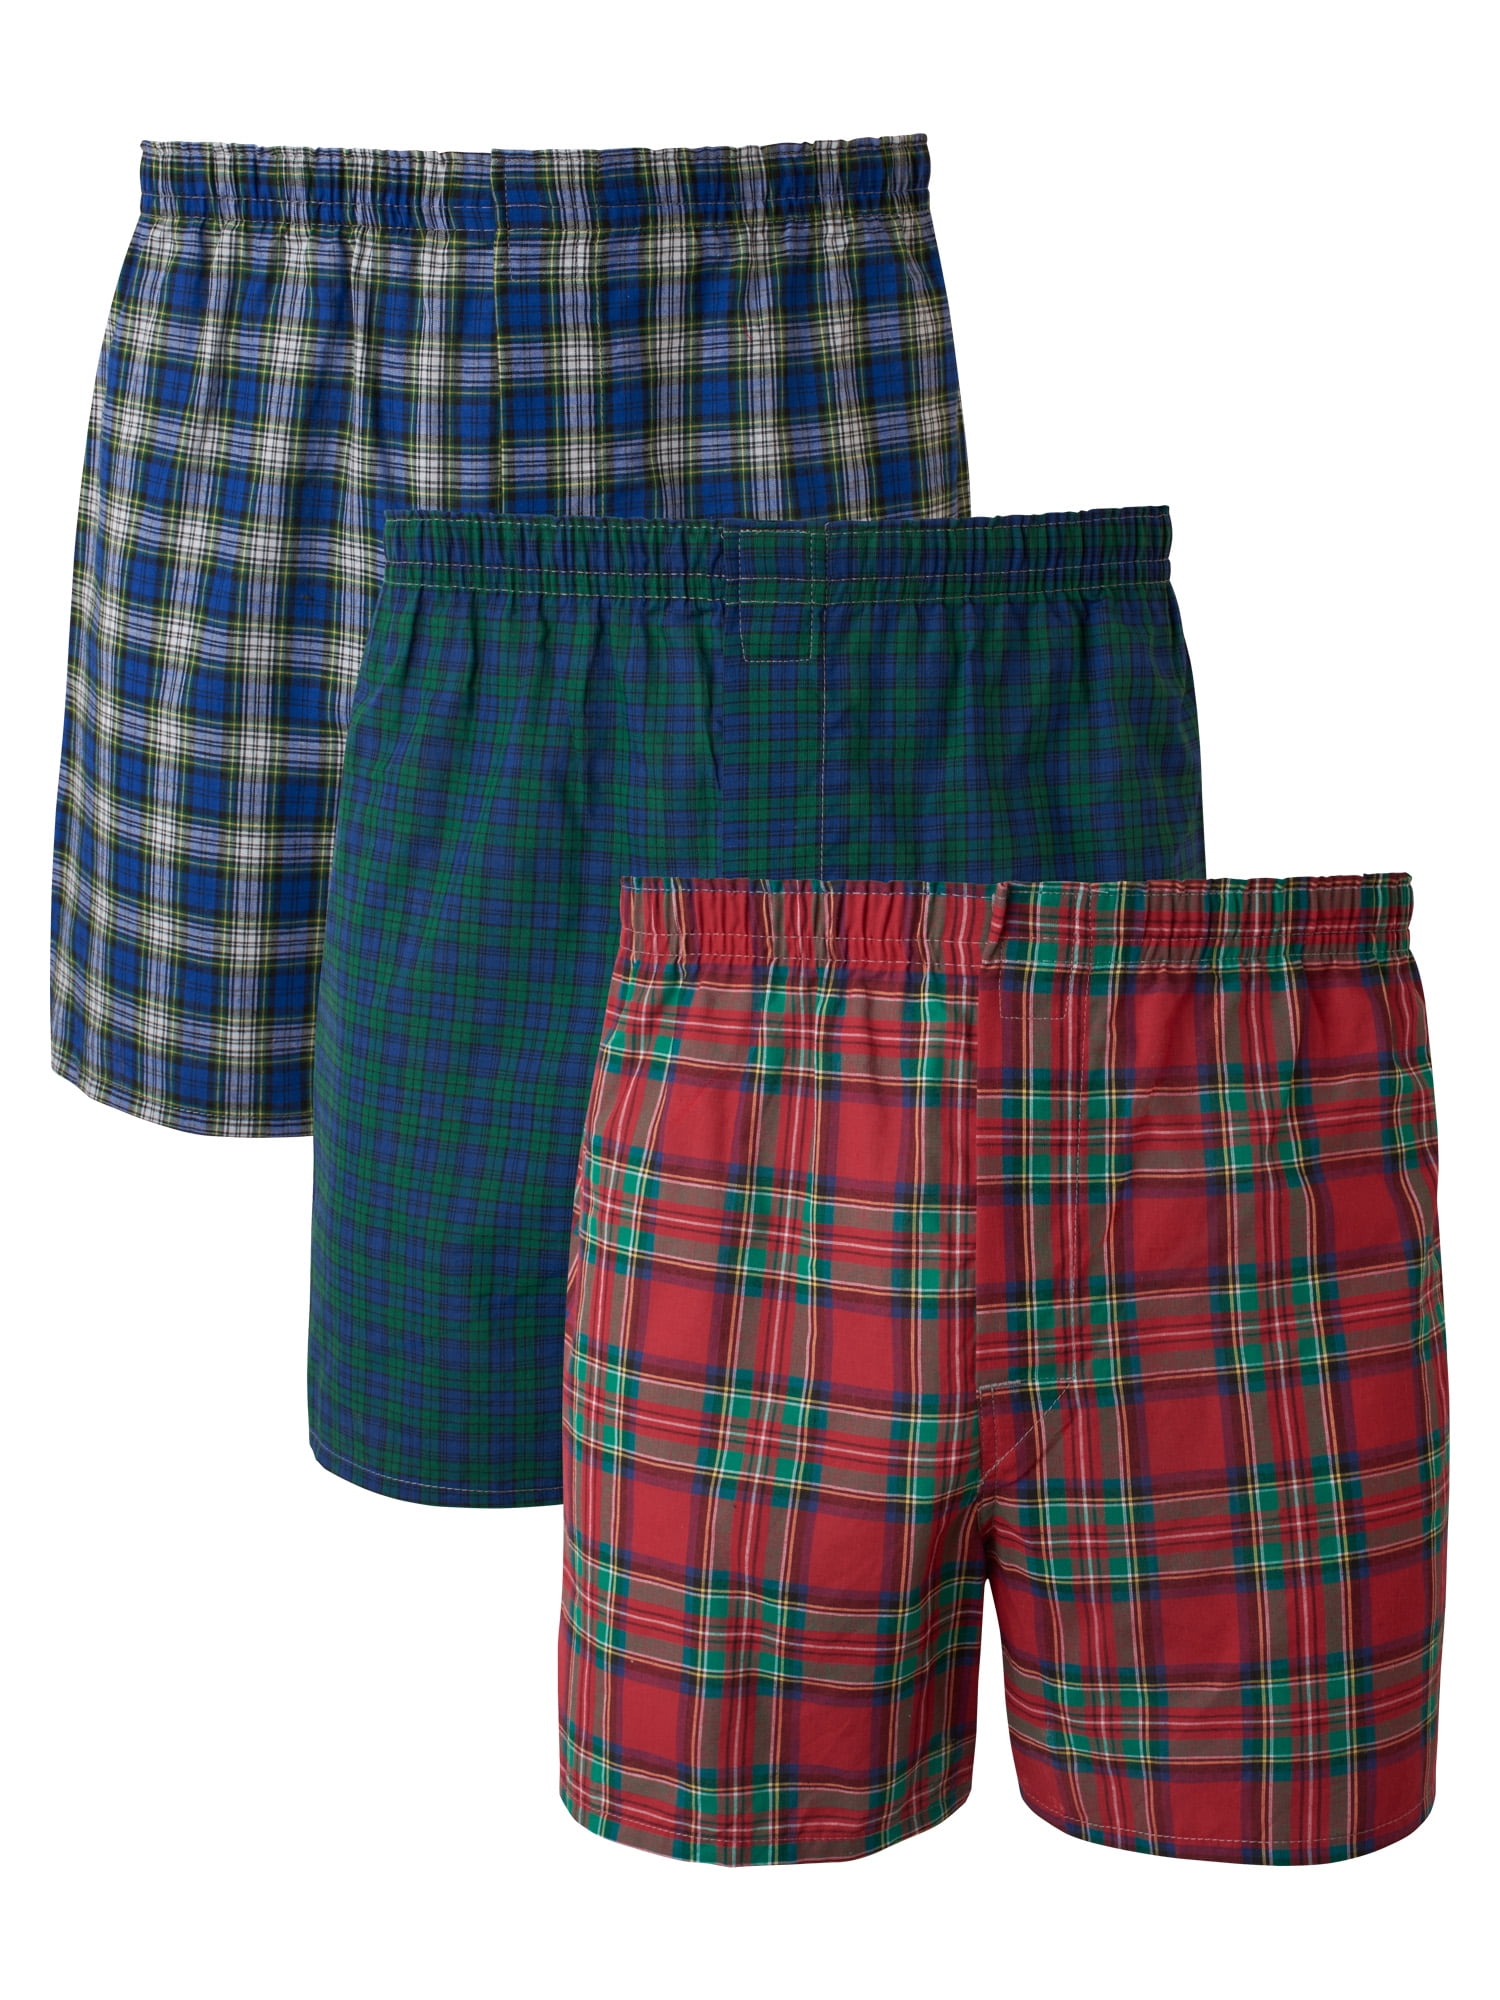 Your All Day Comfort Partner; Our Woven Boxer Shorts. Shop online